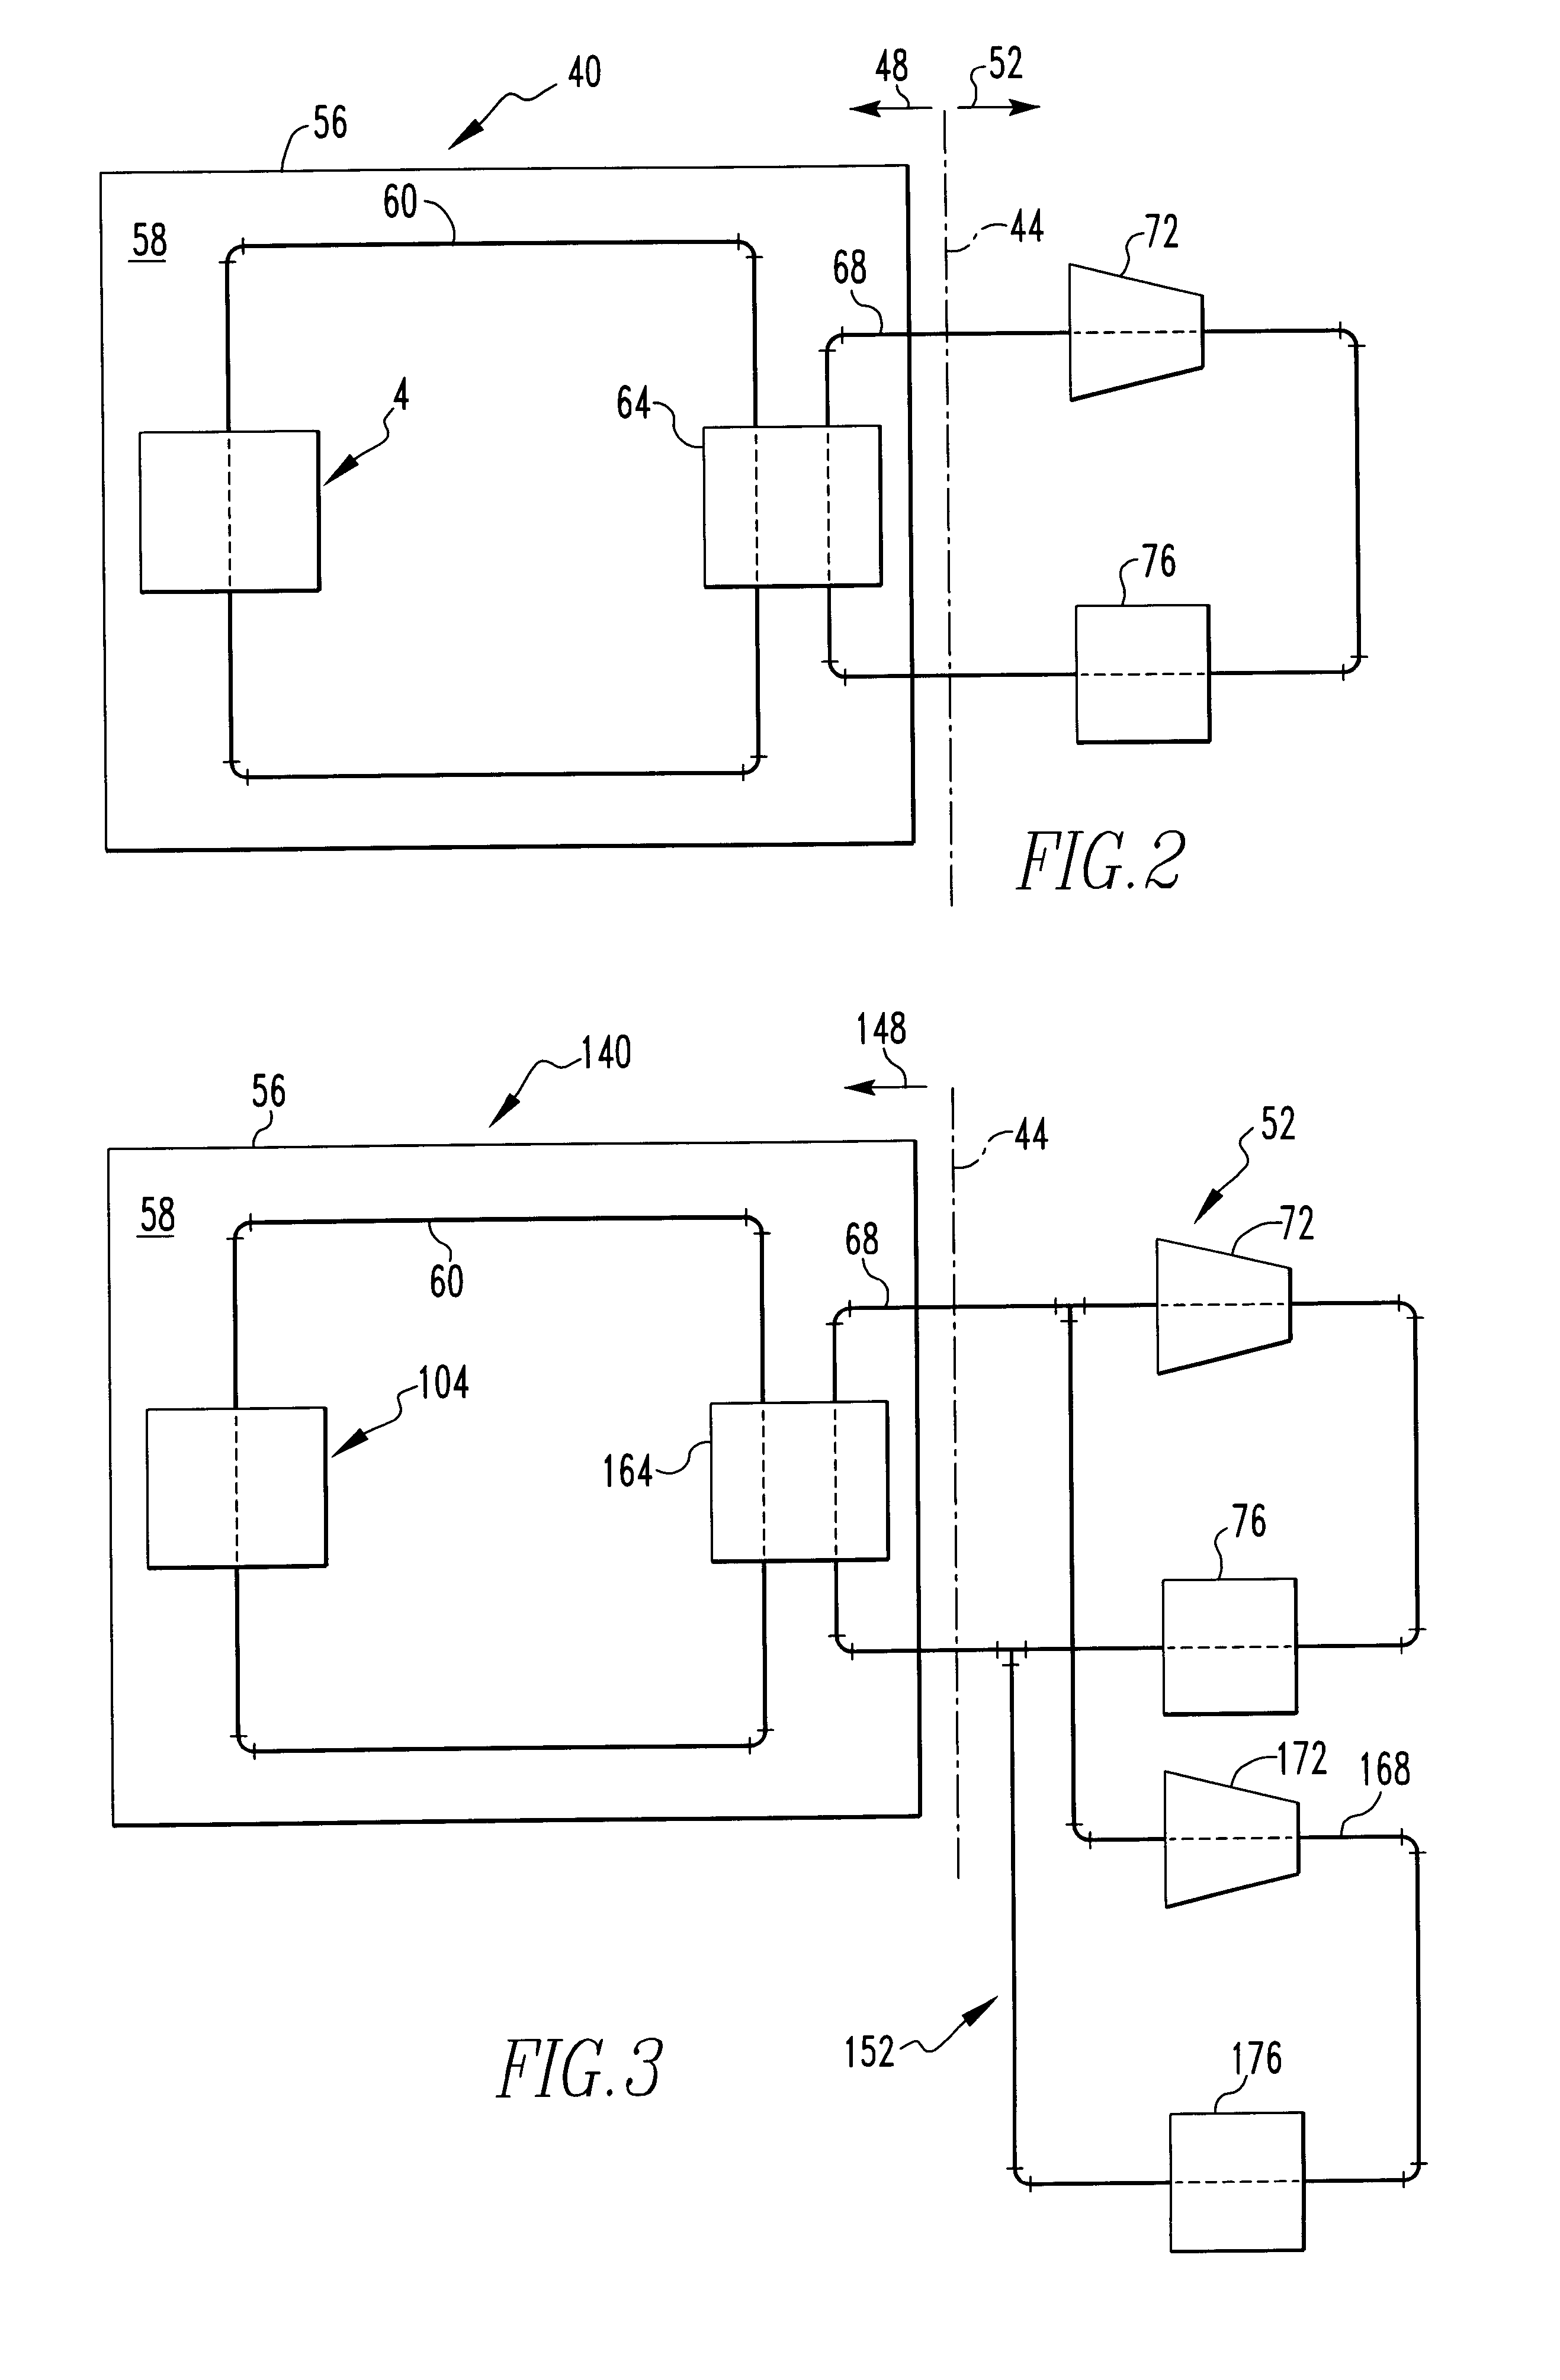 Method of uprating an existing nuclear power plant